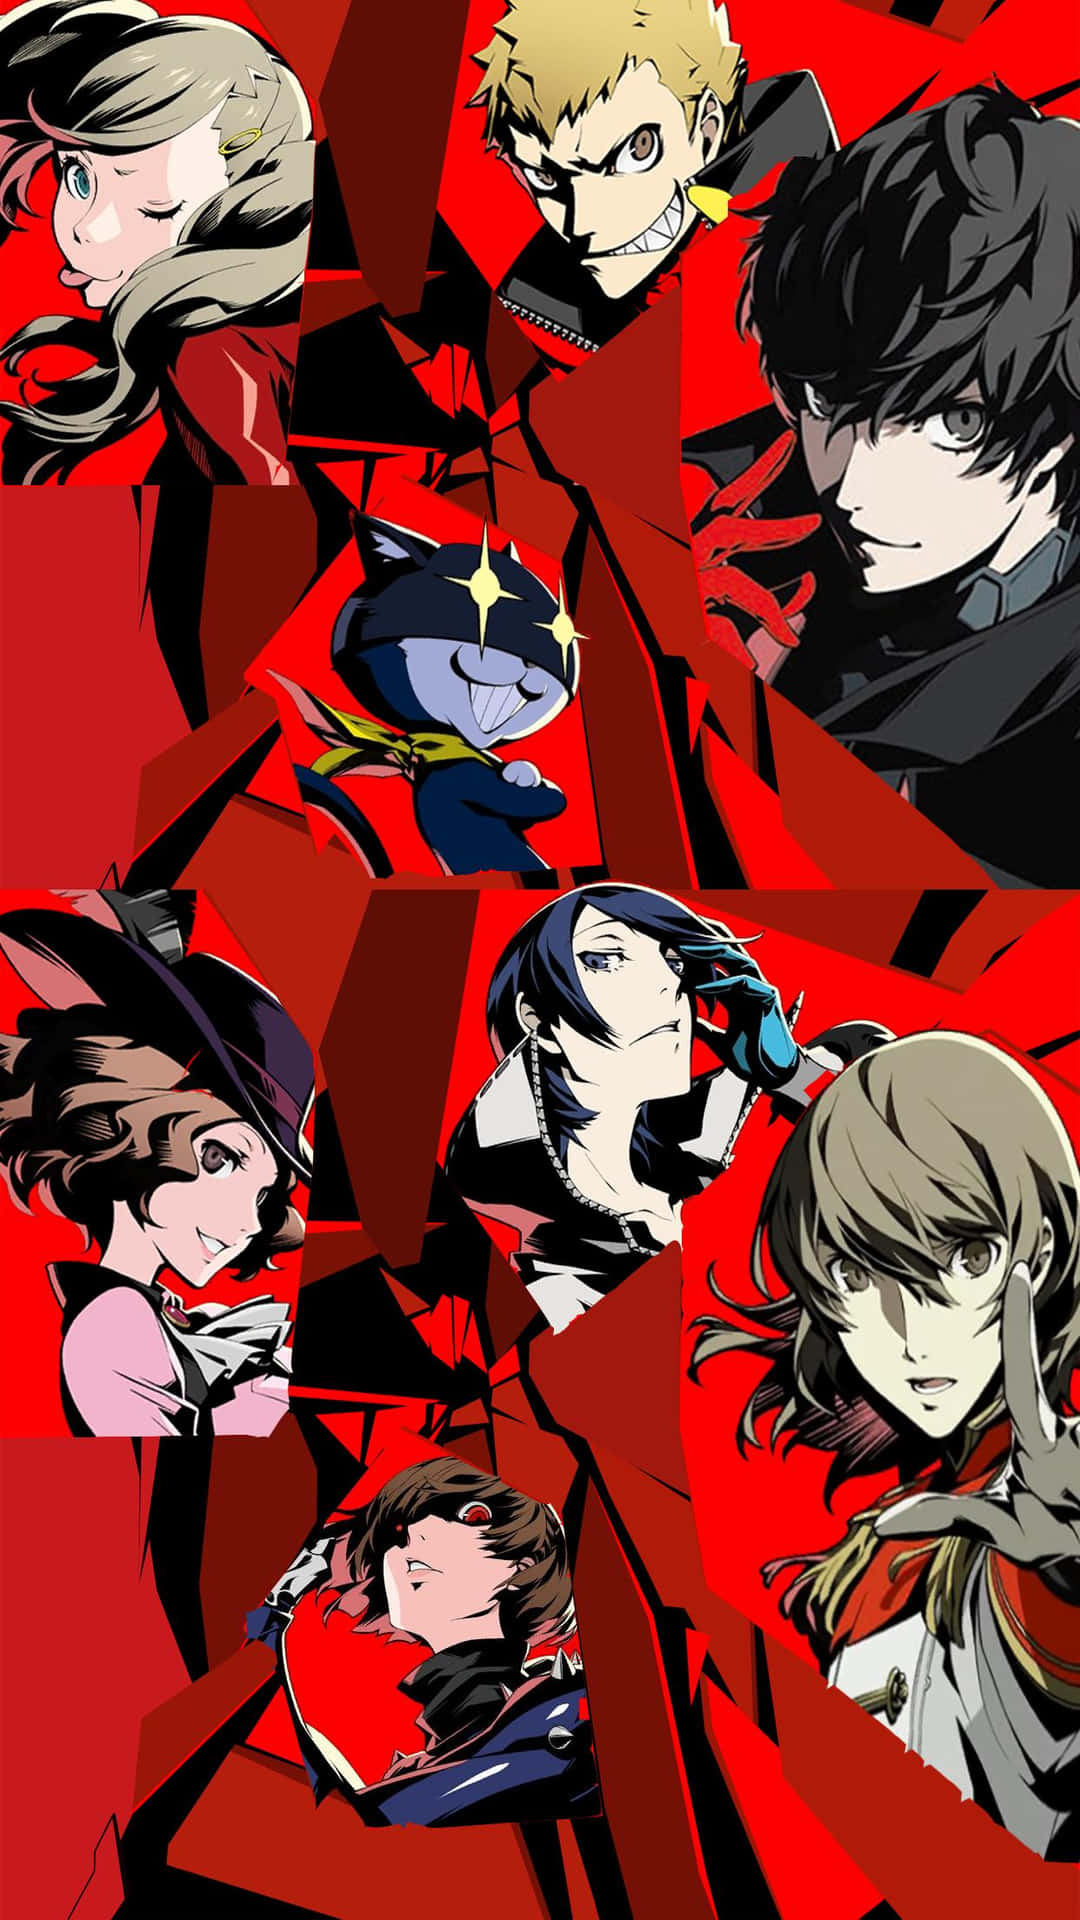 Unlock your inner potential with Persona 5 on your iPhone Wallpaper